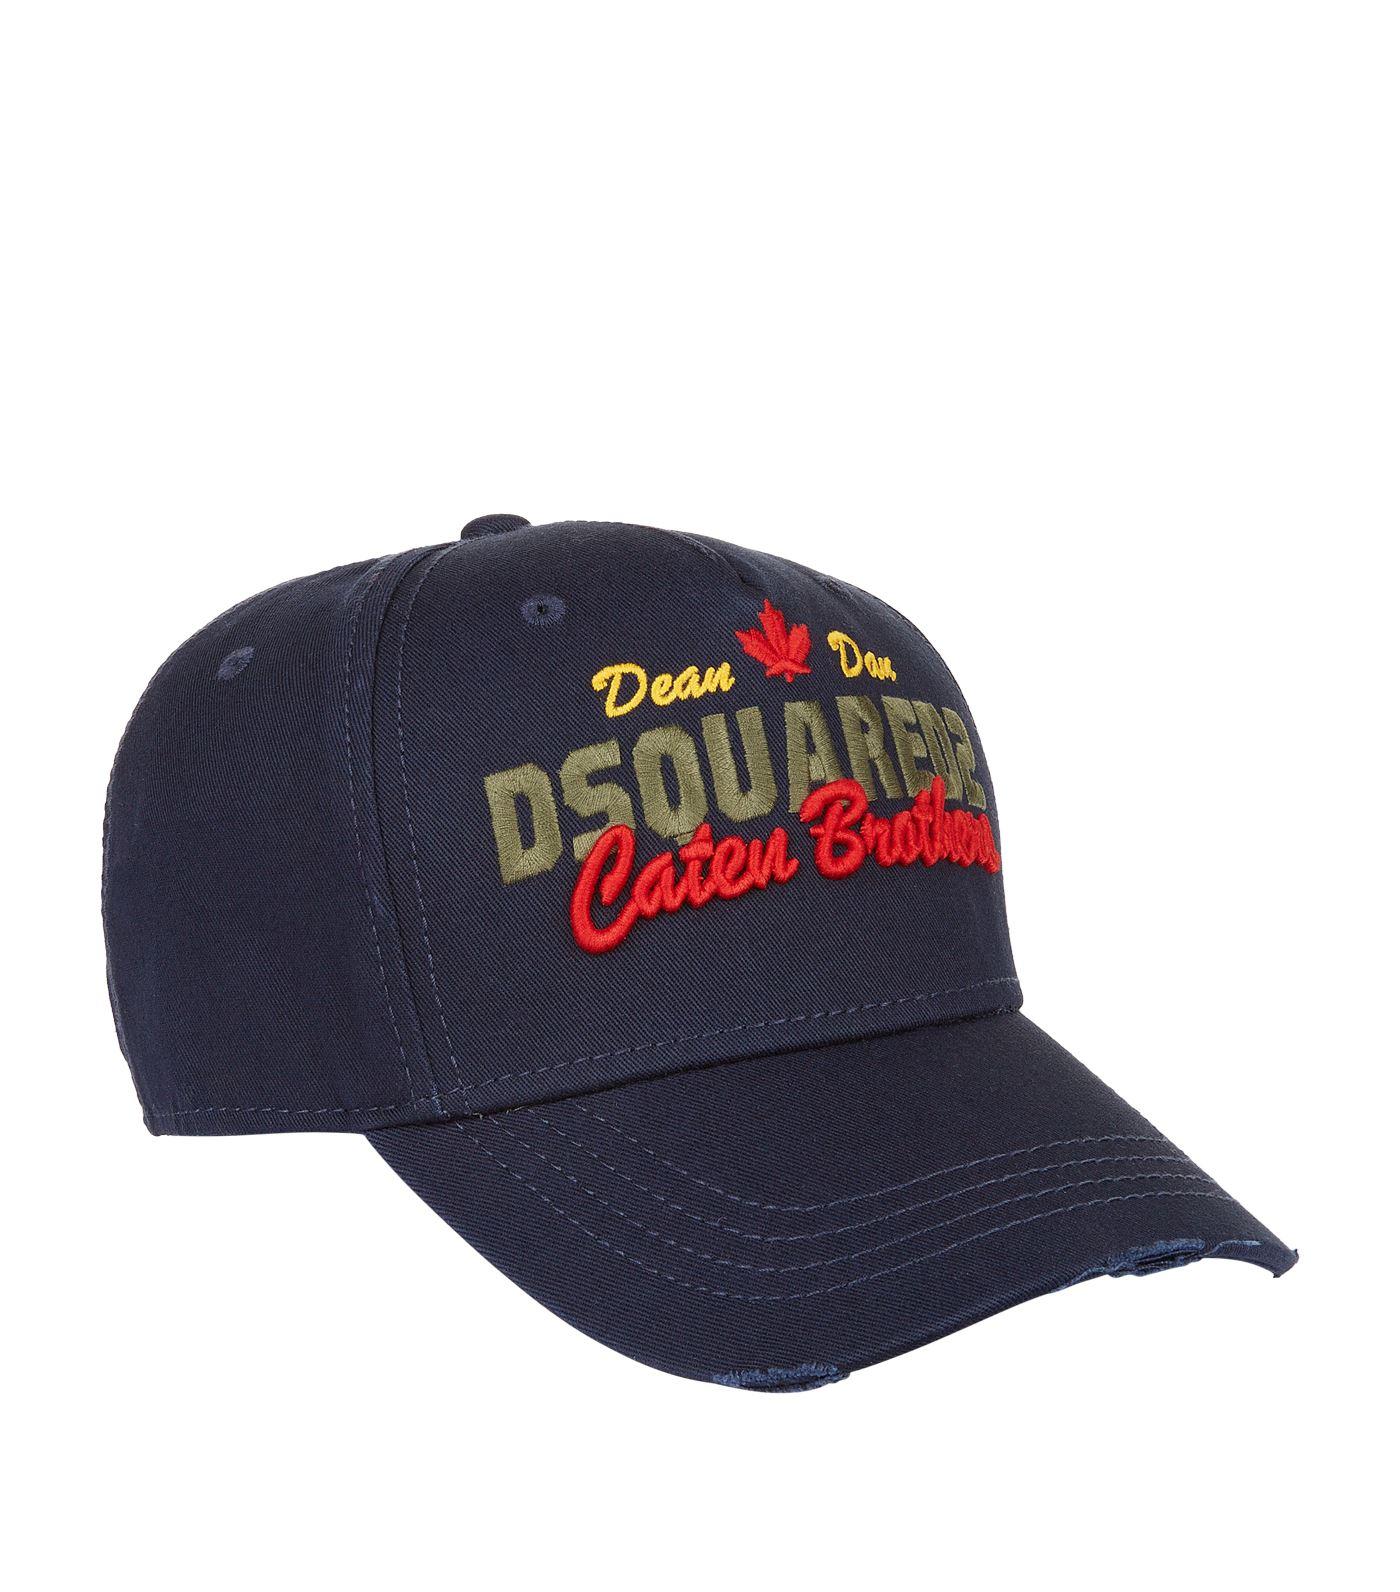 Dsquared2 Caten Brothers Baseball Cap 